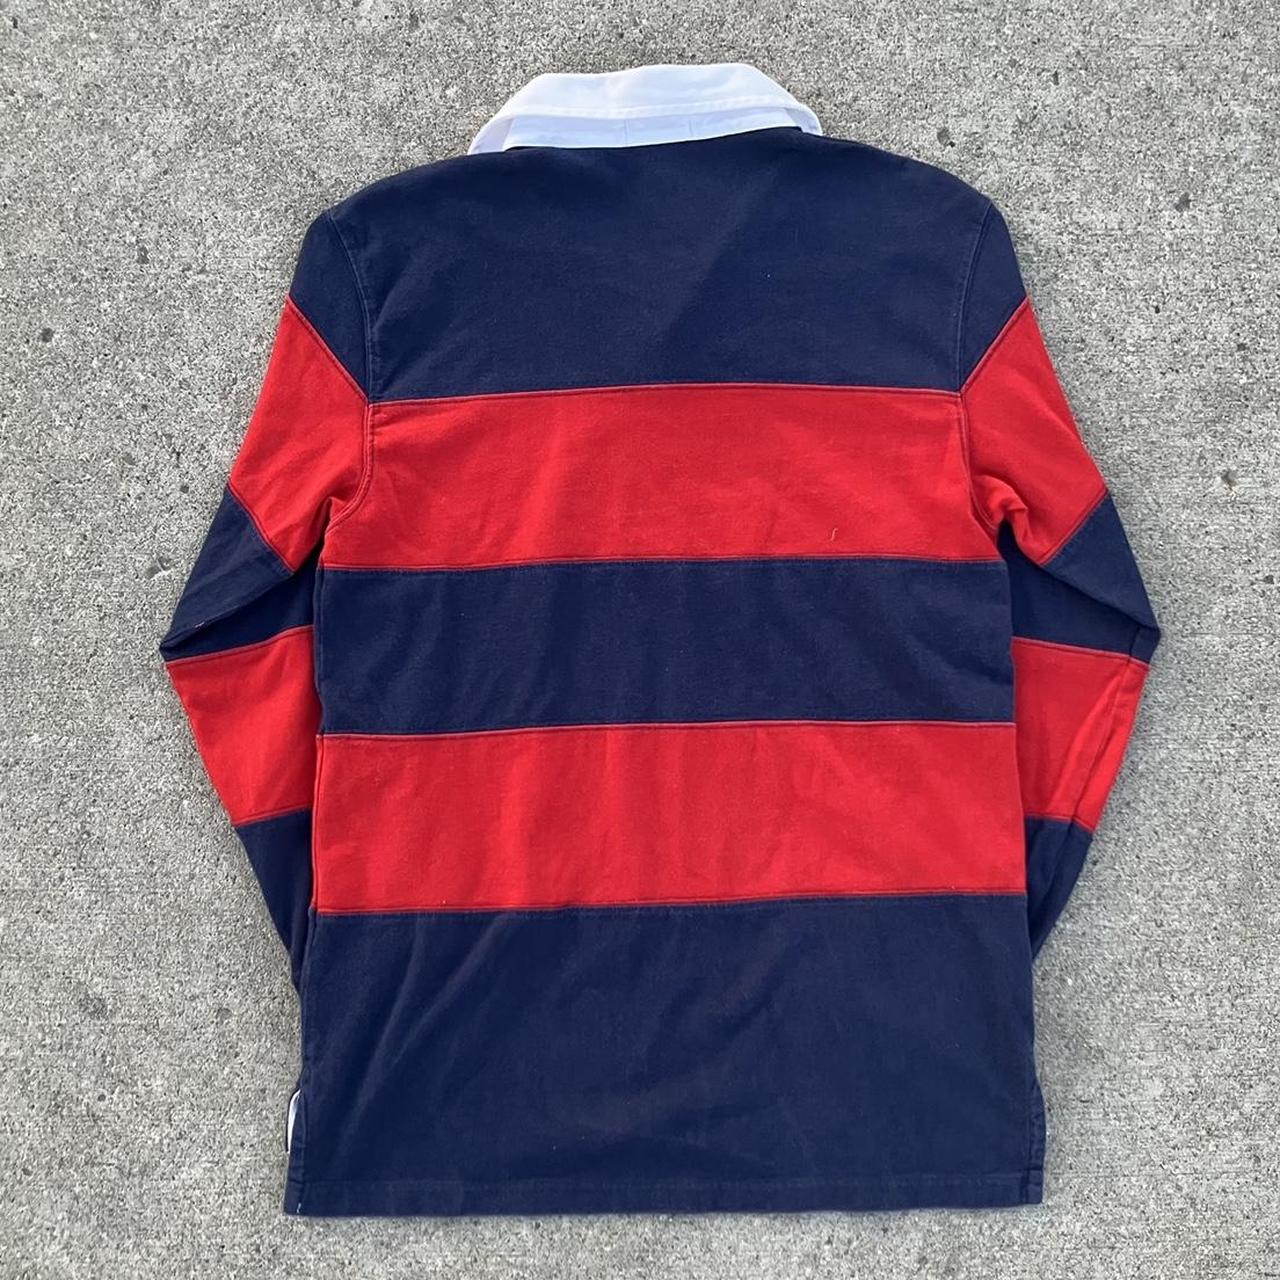 Polo Ralph Lauren Women's Red and Blue Polo-shirts | Depop